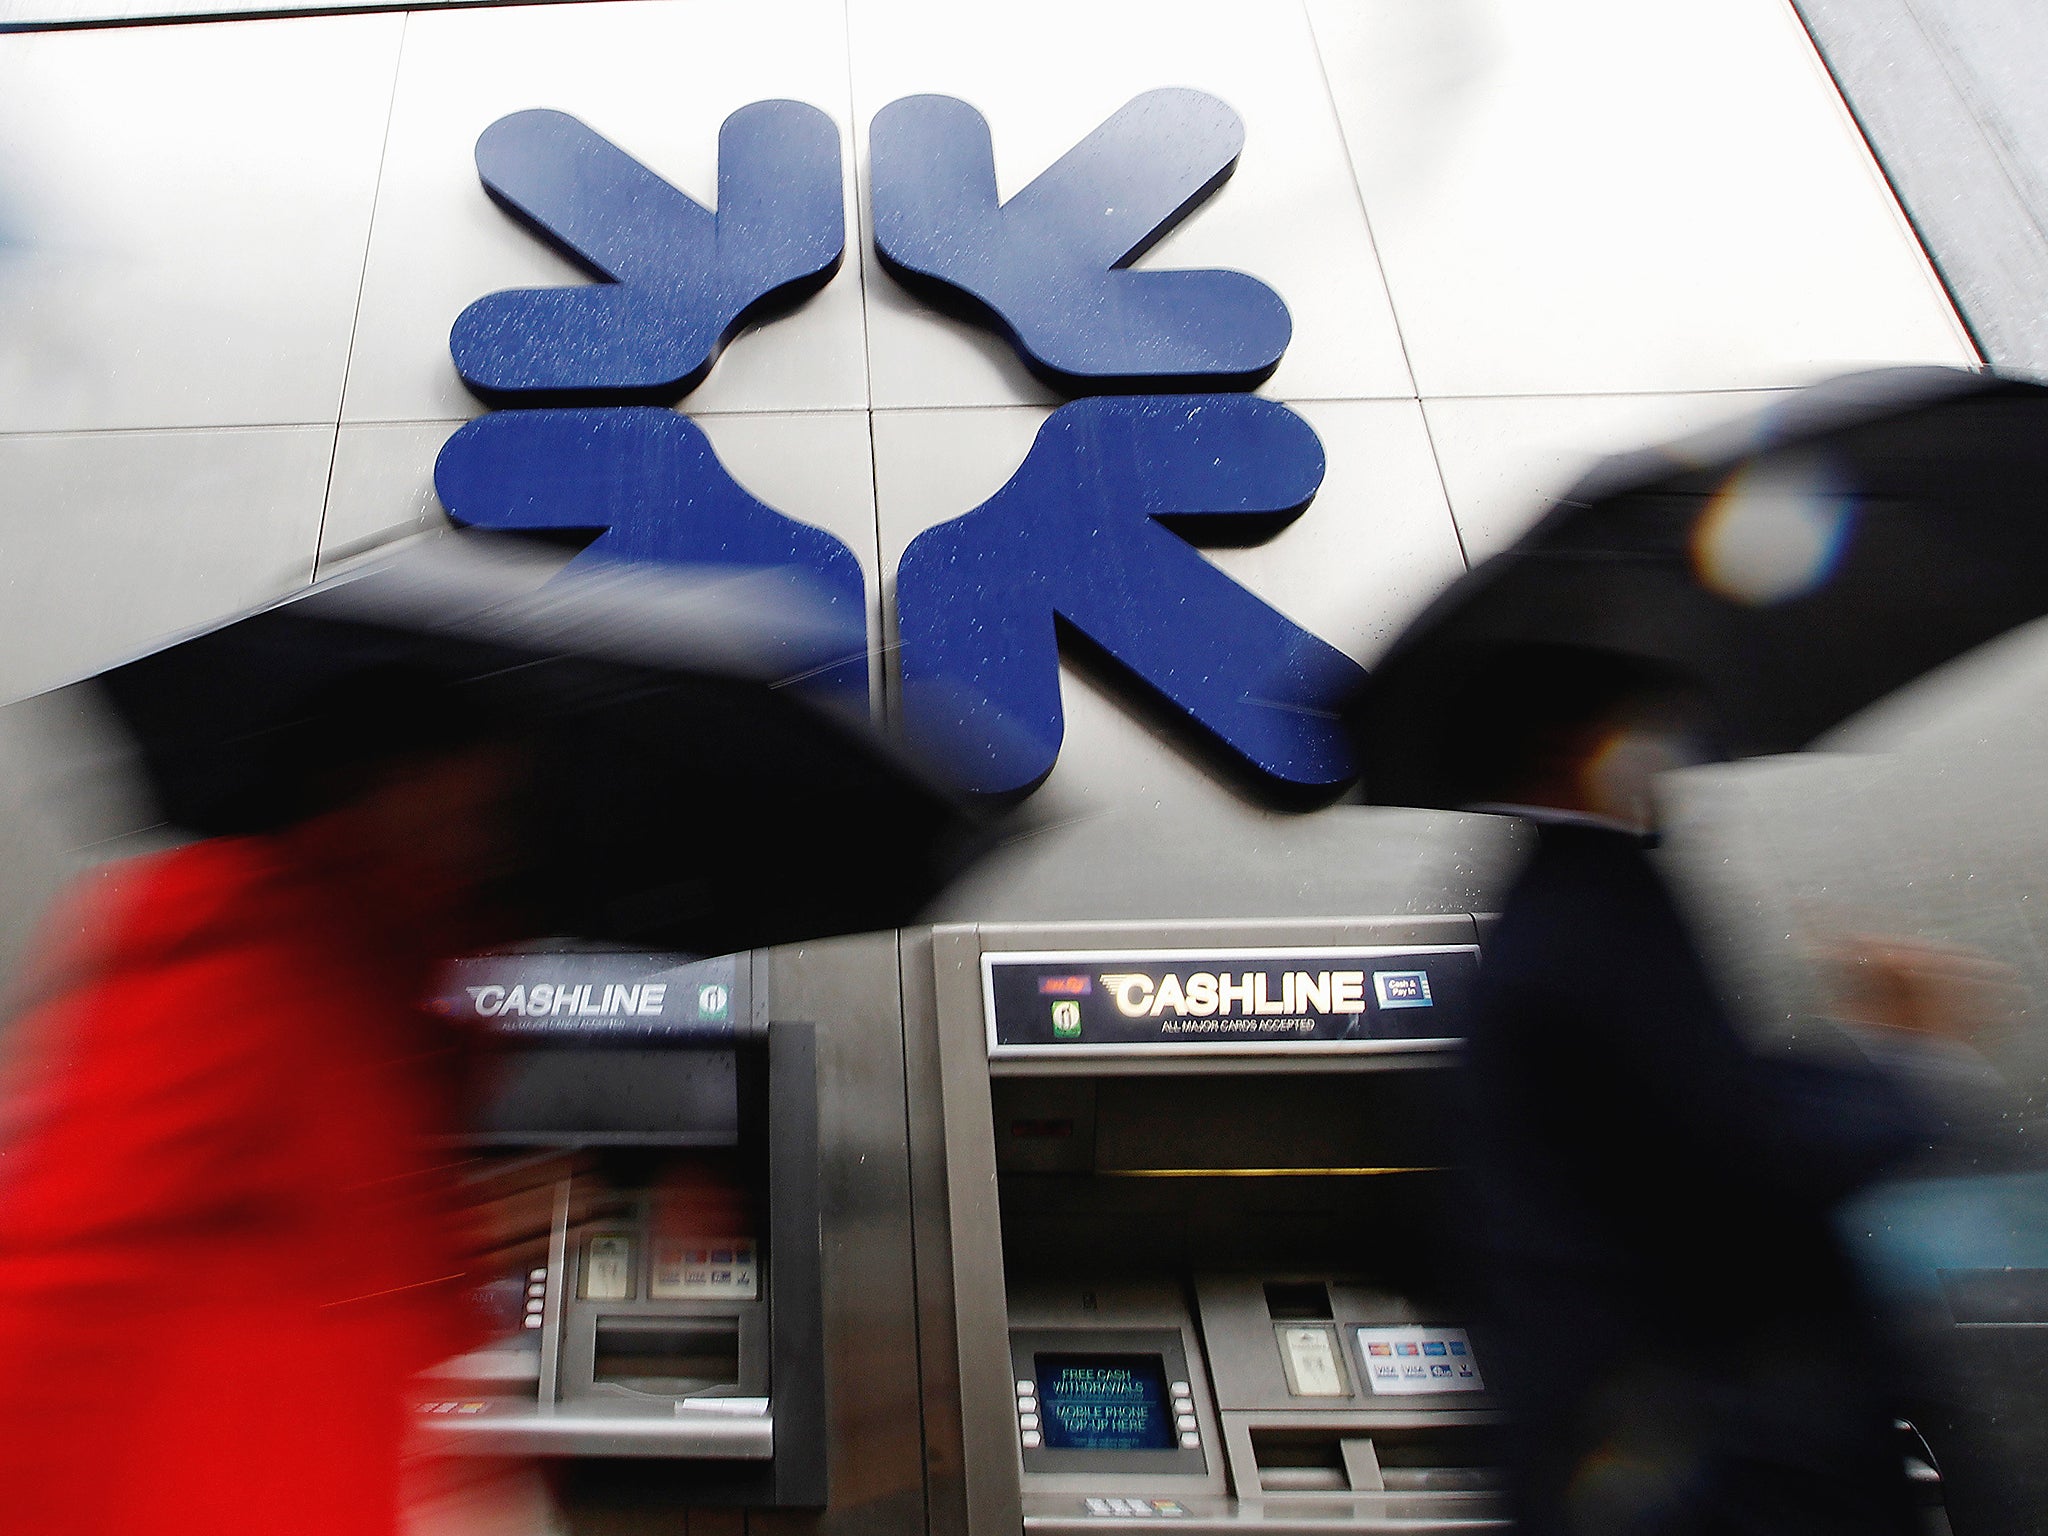 RBS has lost more than £50bn since it received a £45bn bail out from taxpayers at the height of the financial crisis